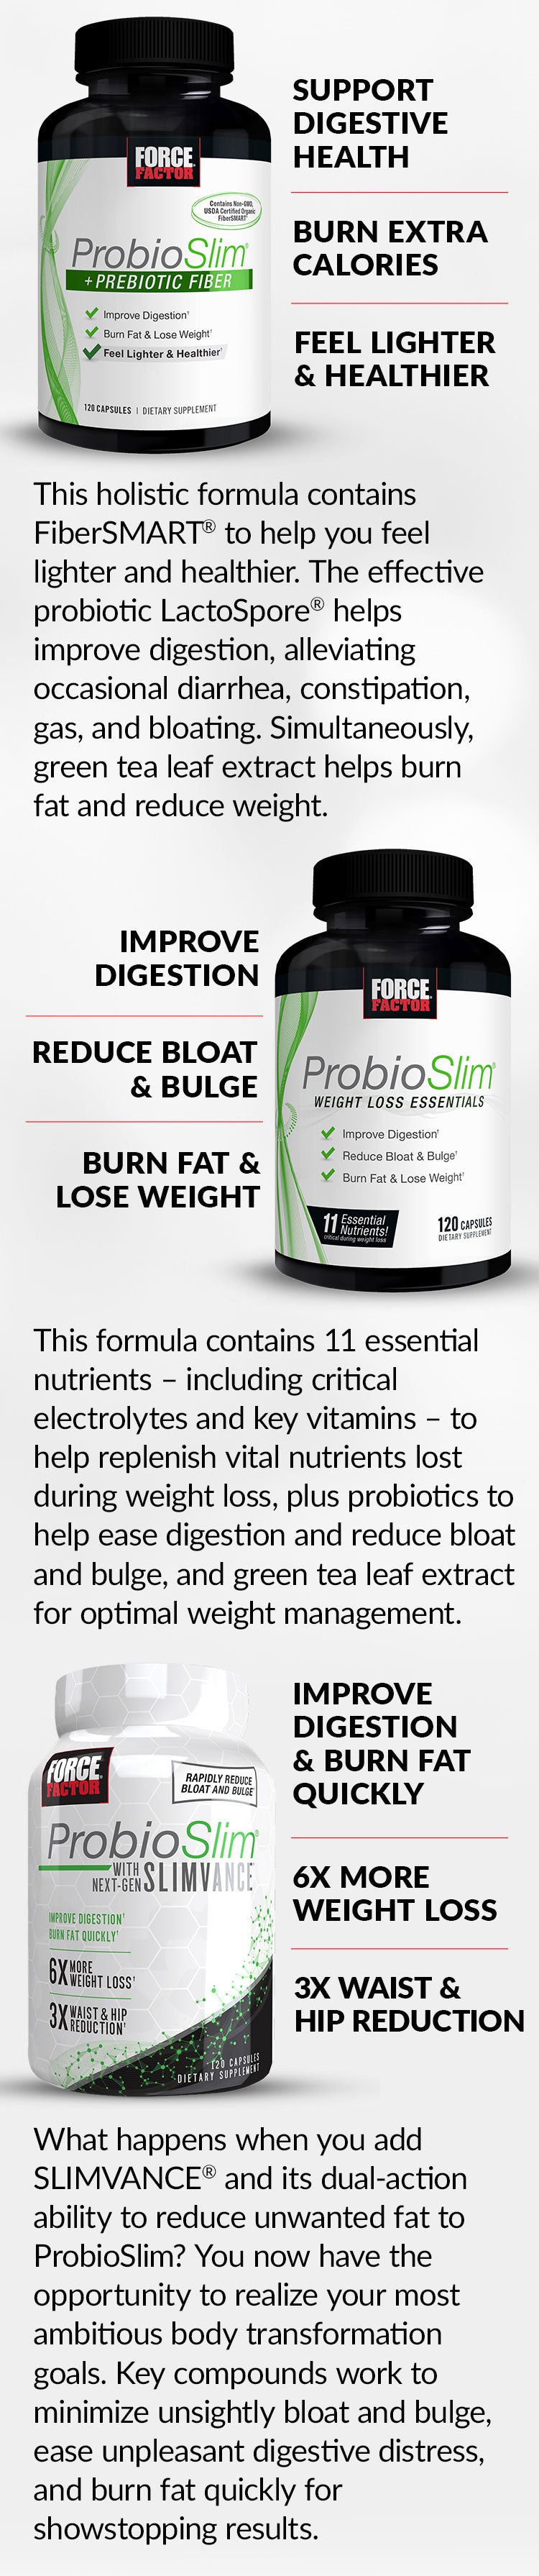 Support Digestive Health. Burn Extra Calories, Feel Lighter and Healthier. This holistic formula contains FiberSMART® to help you feel lighter and healthier. The effective probiotic LactoSpore® helps improve digestion, alleviating occasional diarrhea, constipation, gas, and bloating. Simultaneously, green tea leaf extract helps burn fat and reduce weight. Improve Digestion, Reduce Bloat & Bulge, Burn Fat & Lose Weight. This formula contains 11 essential nutrients – including critical electrolytes and key vitamins – to help replenish vital nutrients lost during weight loss, plus probiotics to help ease digestion and reduce bloat and bulge, and green tea leaf extract for optimal weight management. ProbioSlim® with Next-Gen SLIMVANCE. Improve Digestion & Burn Fat Quickly, 6X More Weight Loss, 3X Waist & Hip Reduction. What happens when you add SLIMVANCE® and its dual-action ability to reduce unwanted fat to ProbioSlim? You now have the opportunity to realize your most ambitious body transformation goals. Key compounds work to minimize unsightly bloat and bulge, ease unpleasant digestive distress, and burn fat quickly for showstopping results.